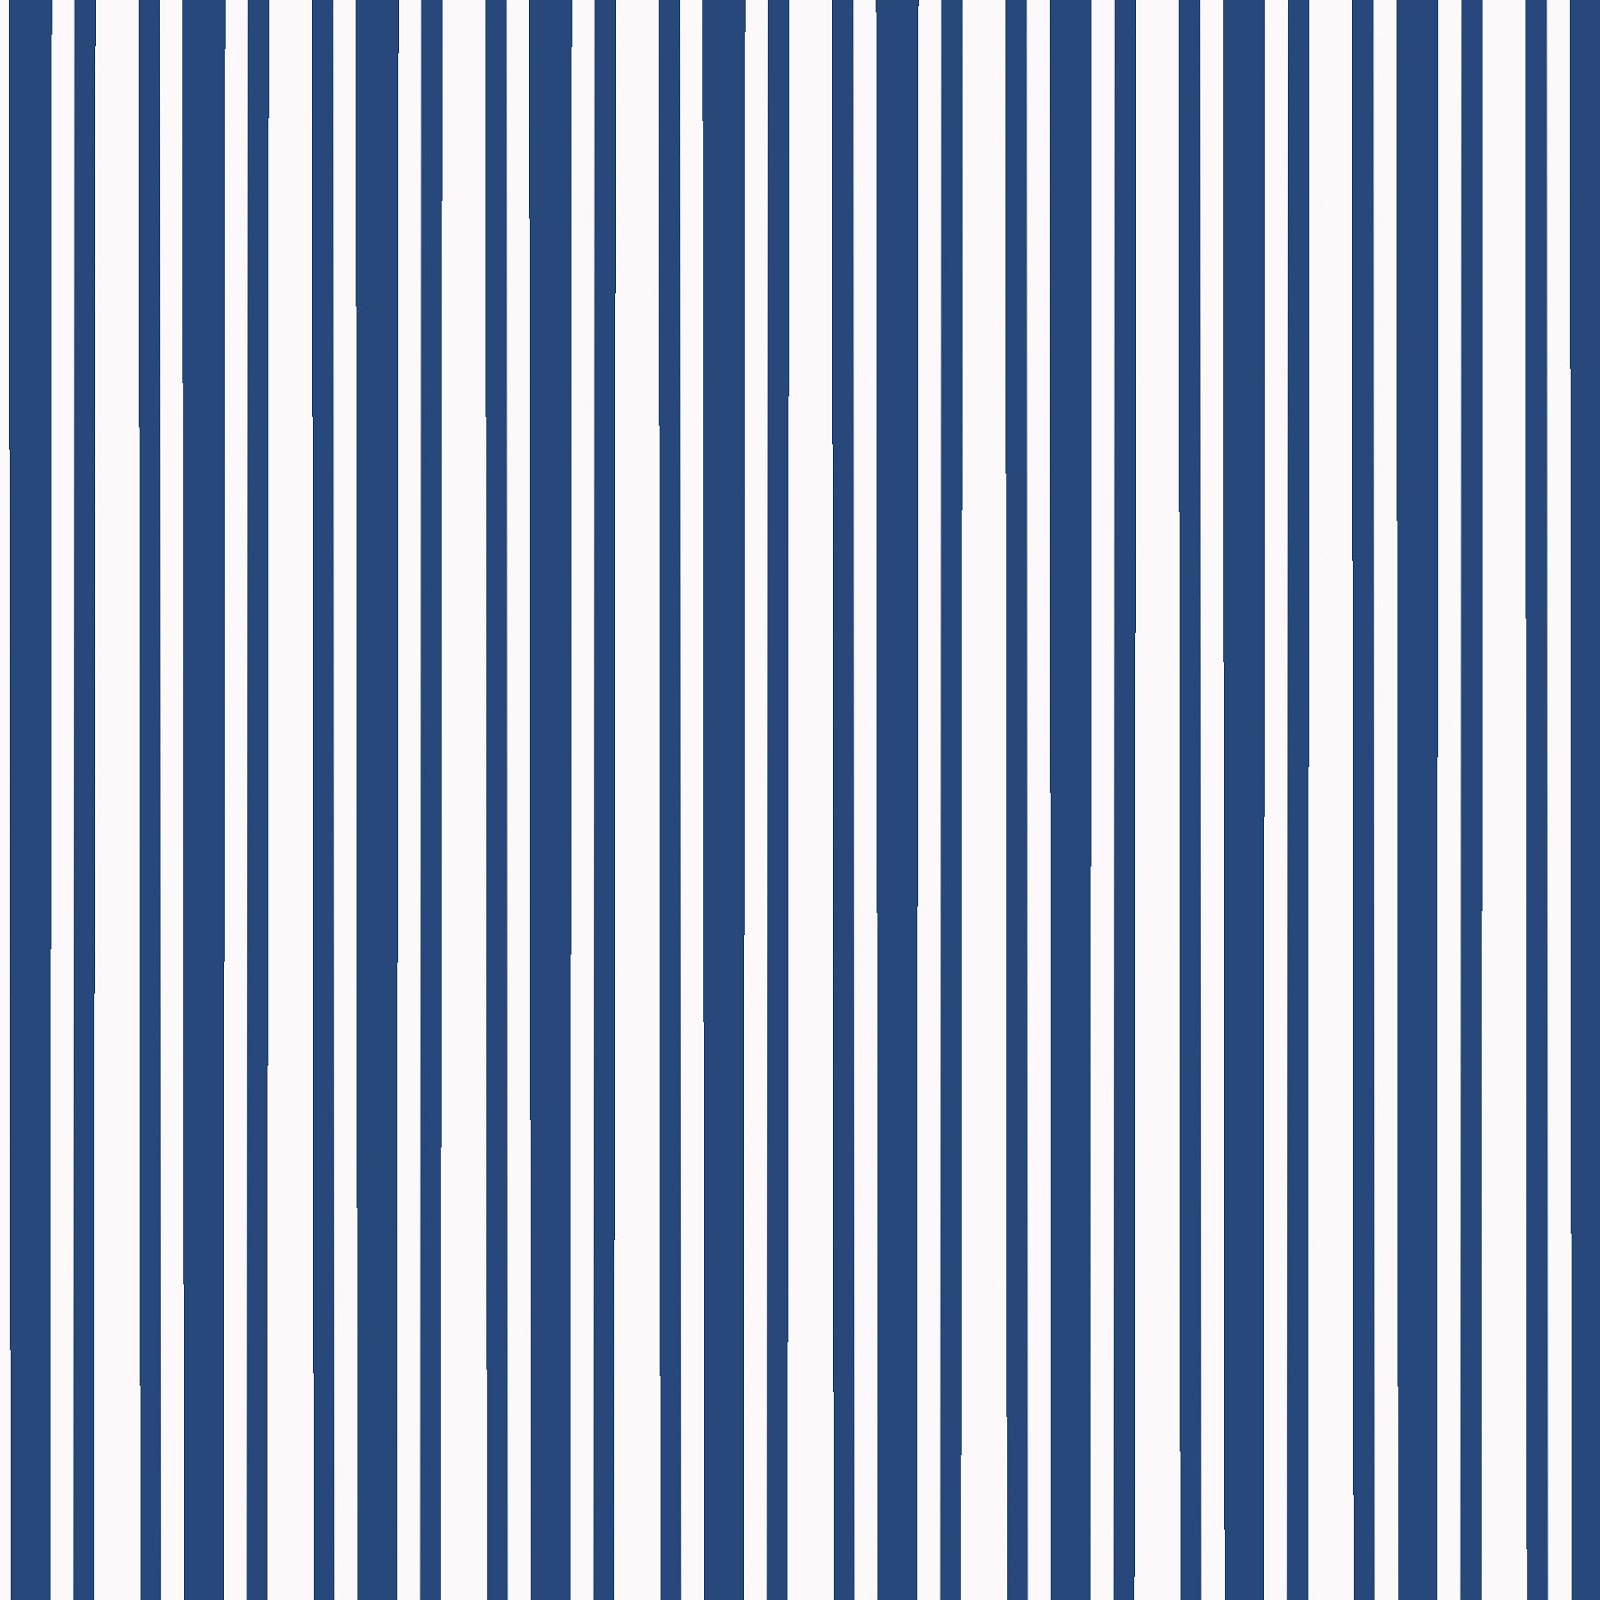 Nautical Stripes Background Nice For Any Crafty